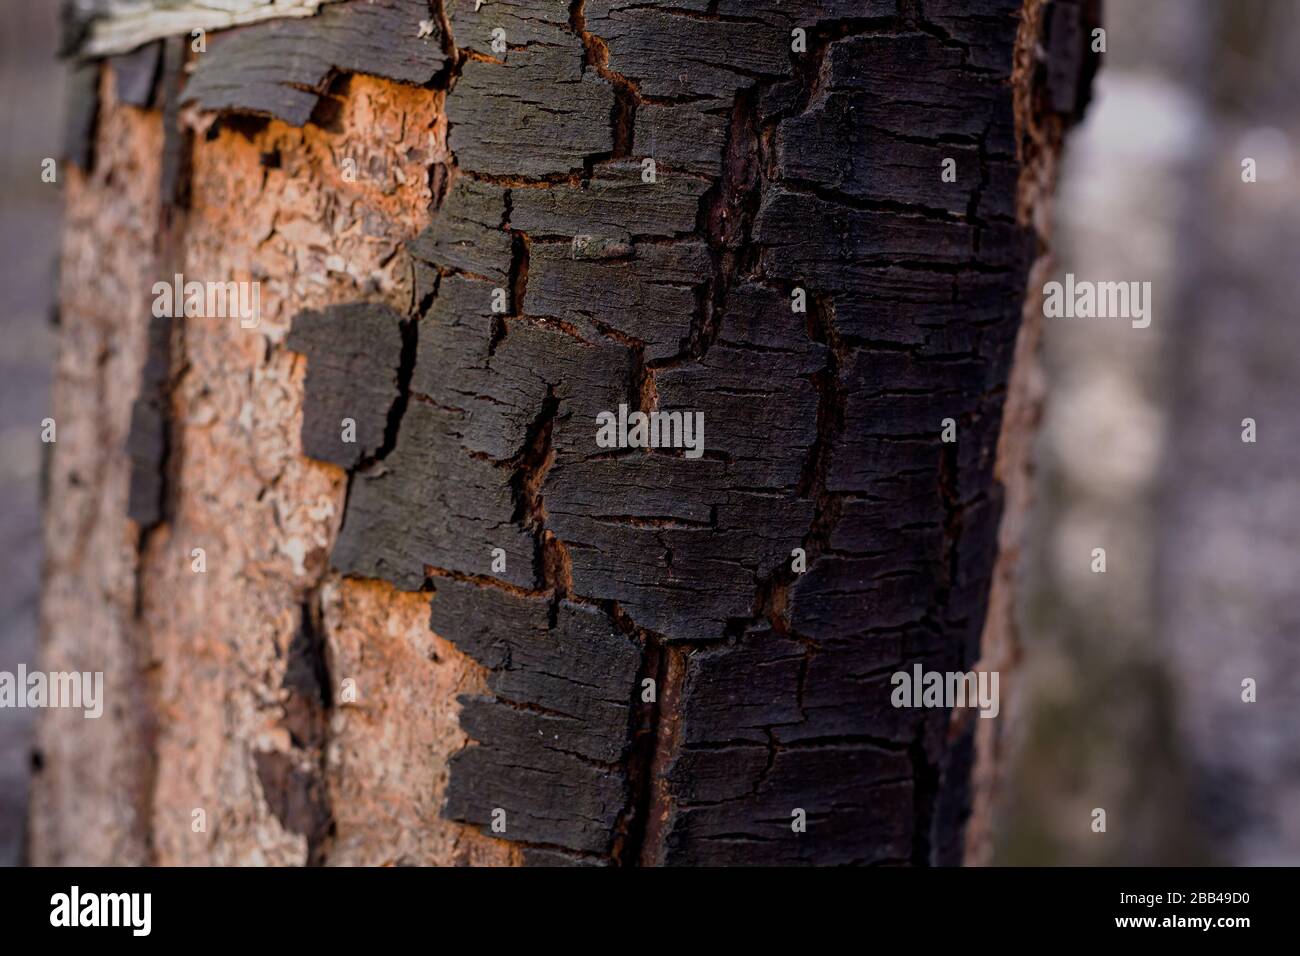 Black tree bark close up. Abstract natural texture or background. Stock Photo